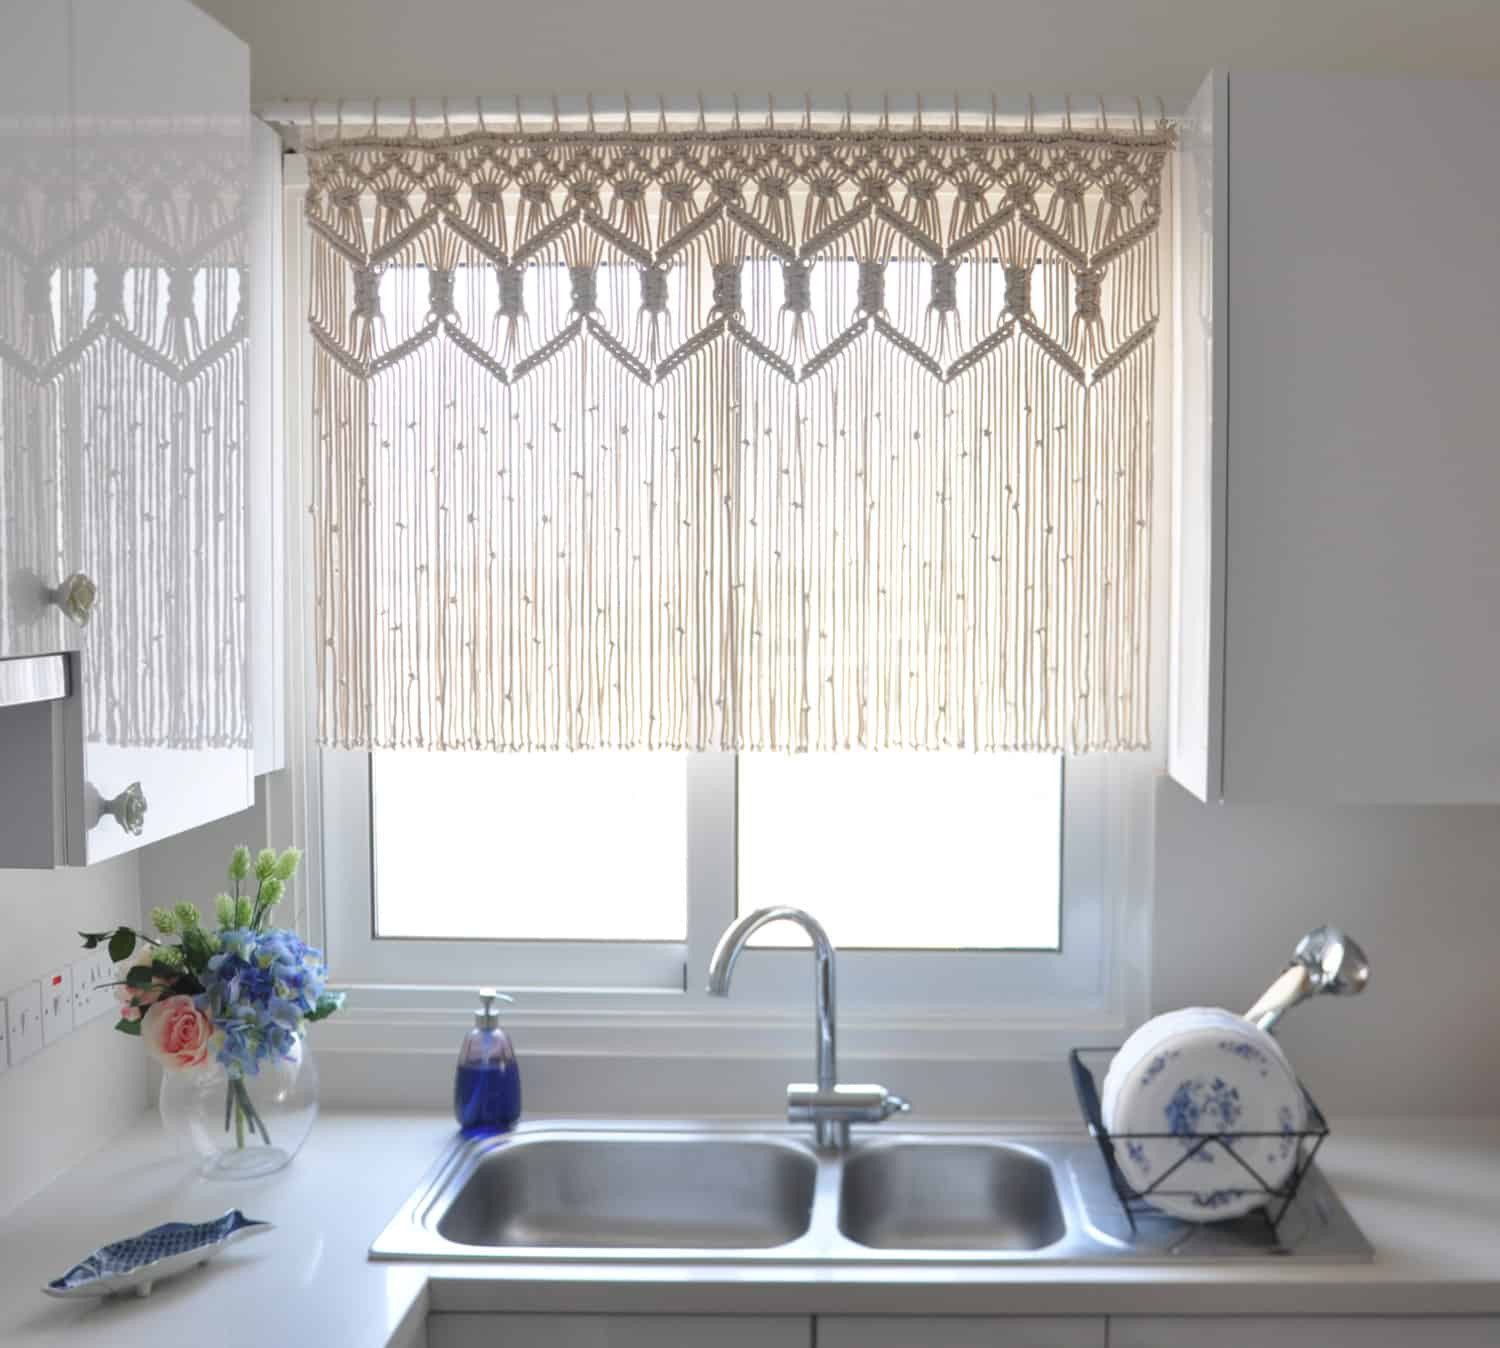 Kitchen Curtains And Valances
 Selection of Kitchen Curtains for Modern Home Decoration